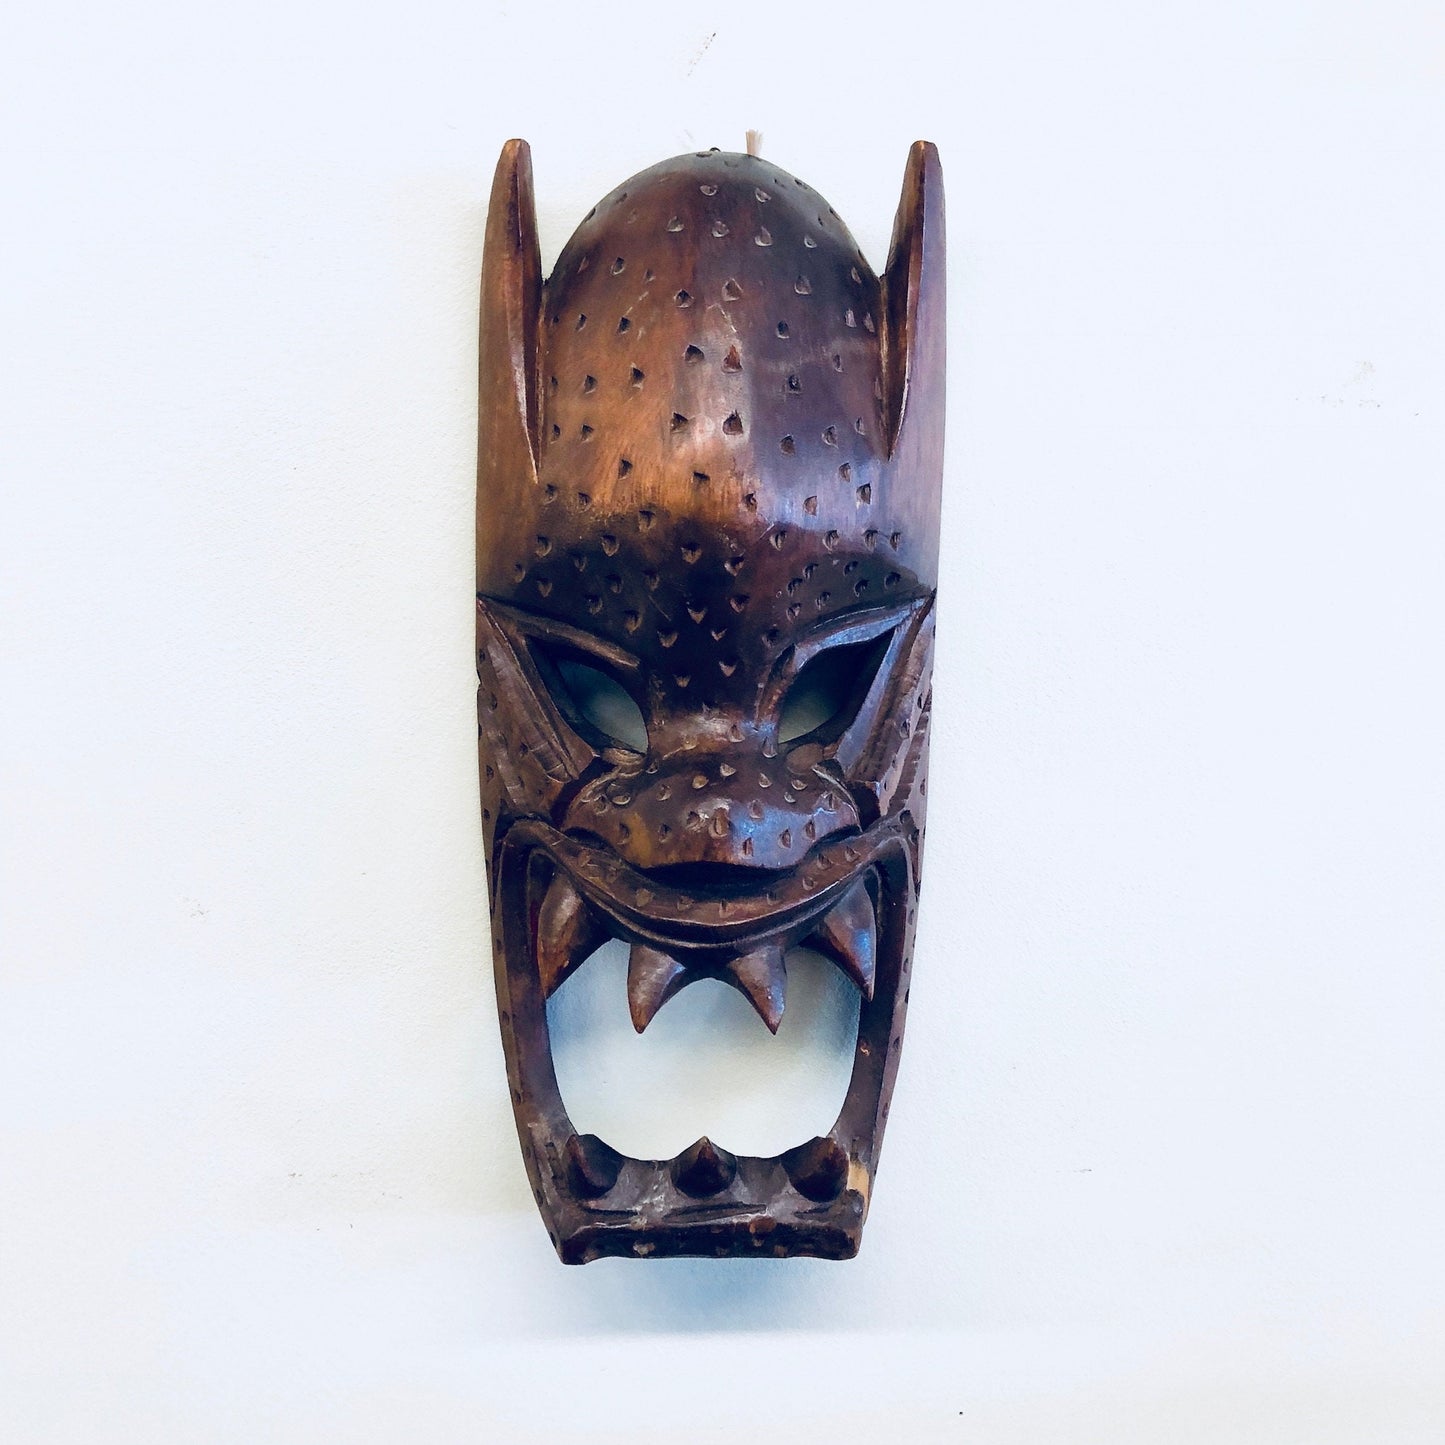 Vintage hand carved wooden mask with intricate details and brown finish, suitable for primitive wall decor or hanging display in the home.